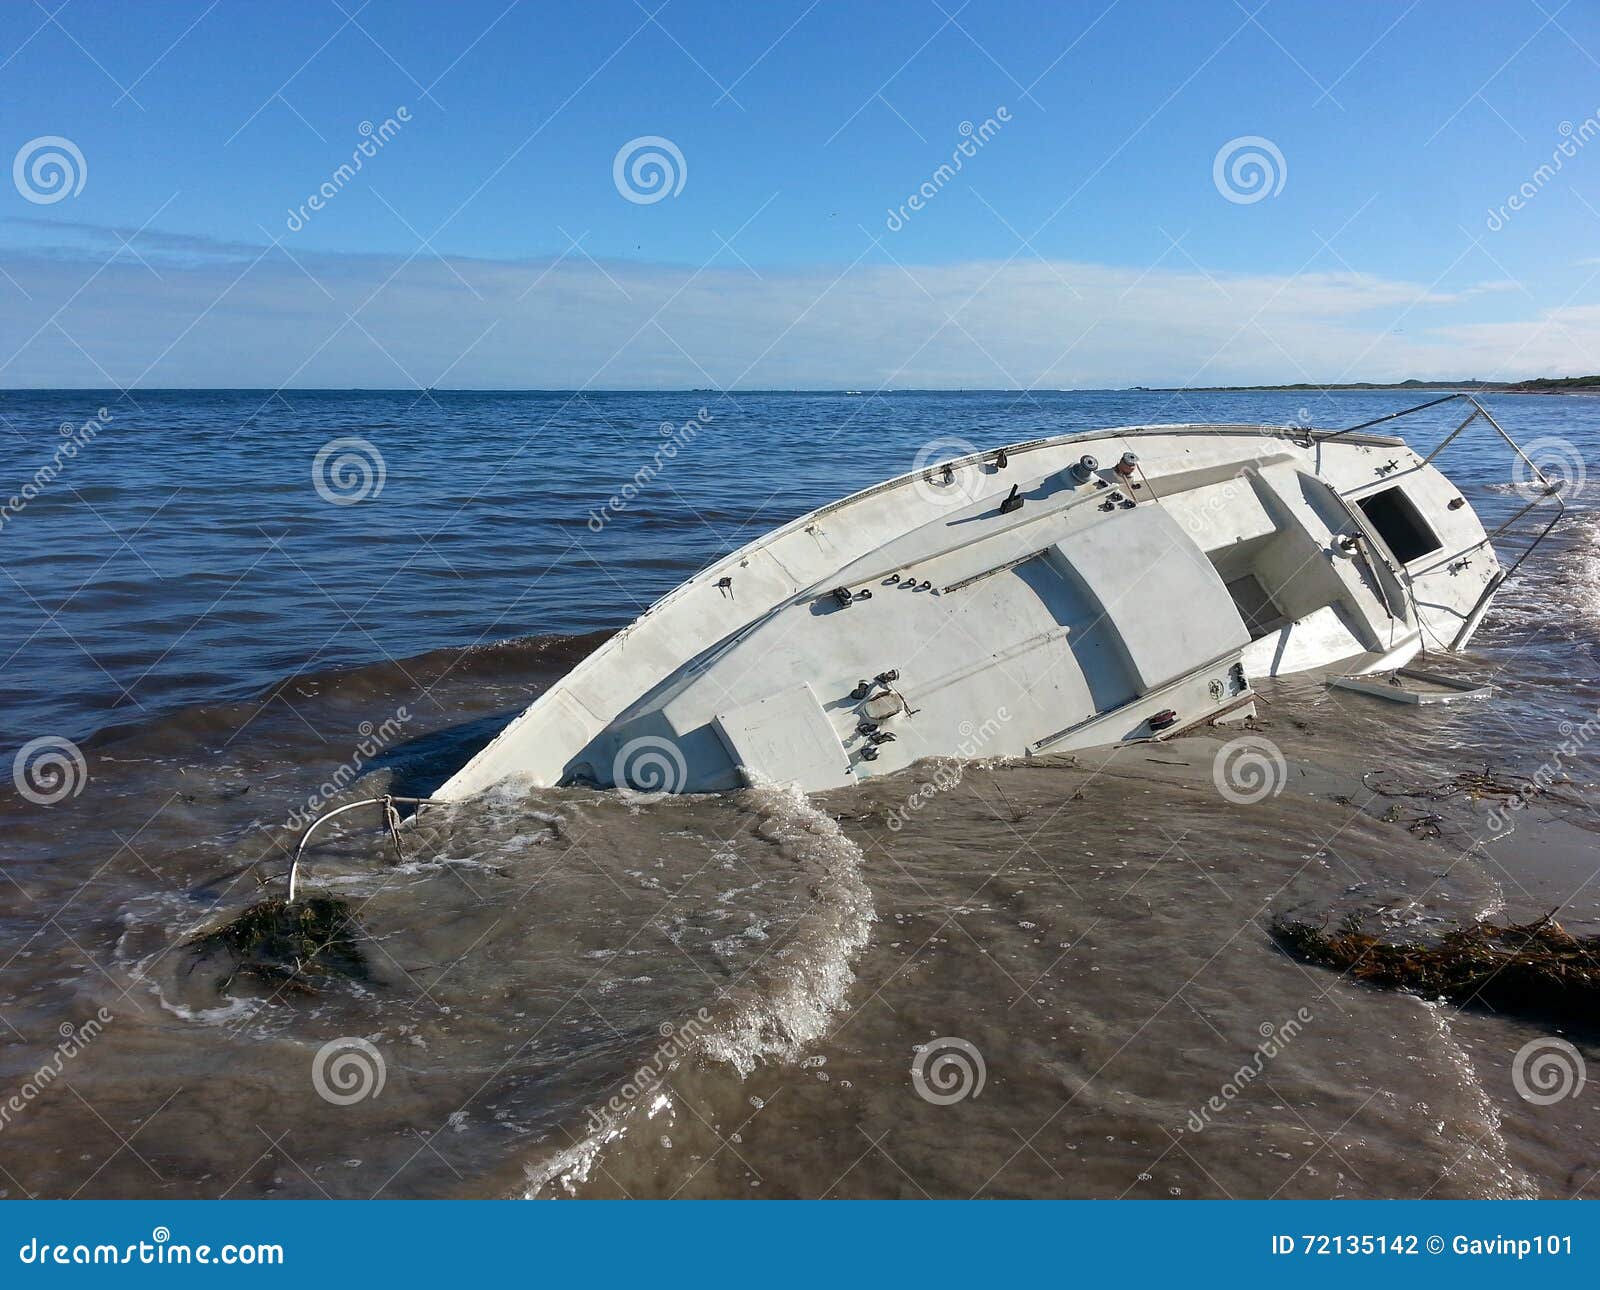 yatch boat beached ship wrecked sunk